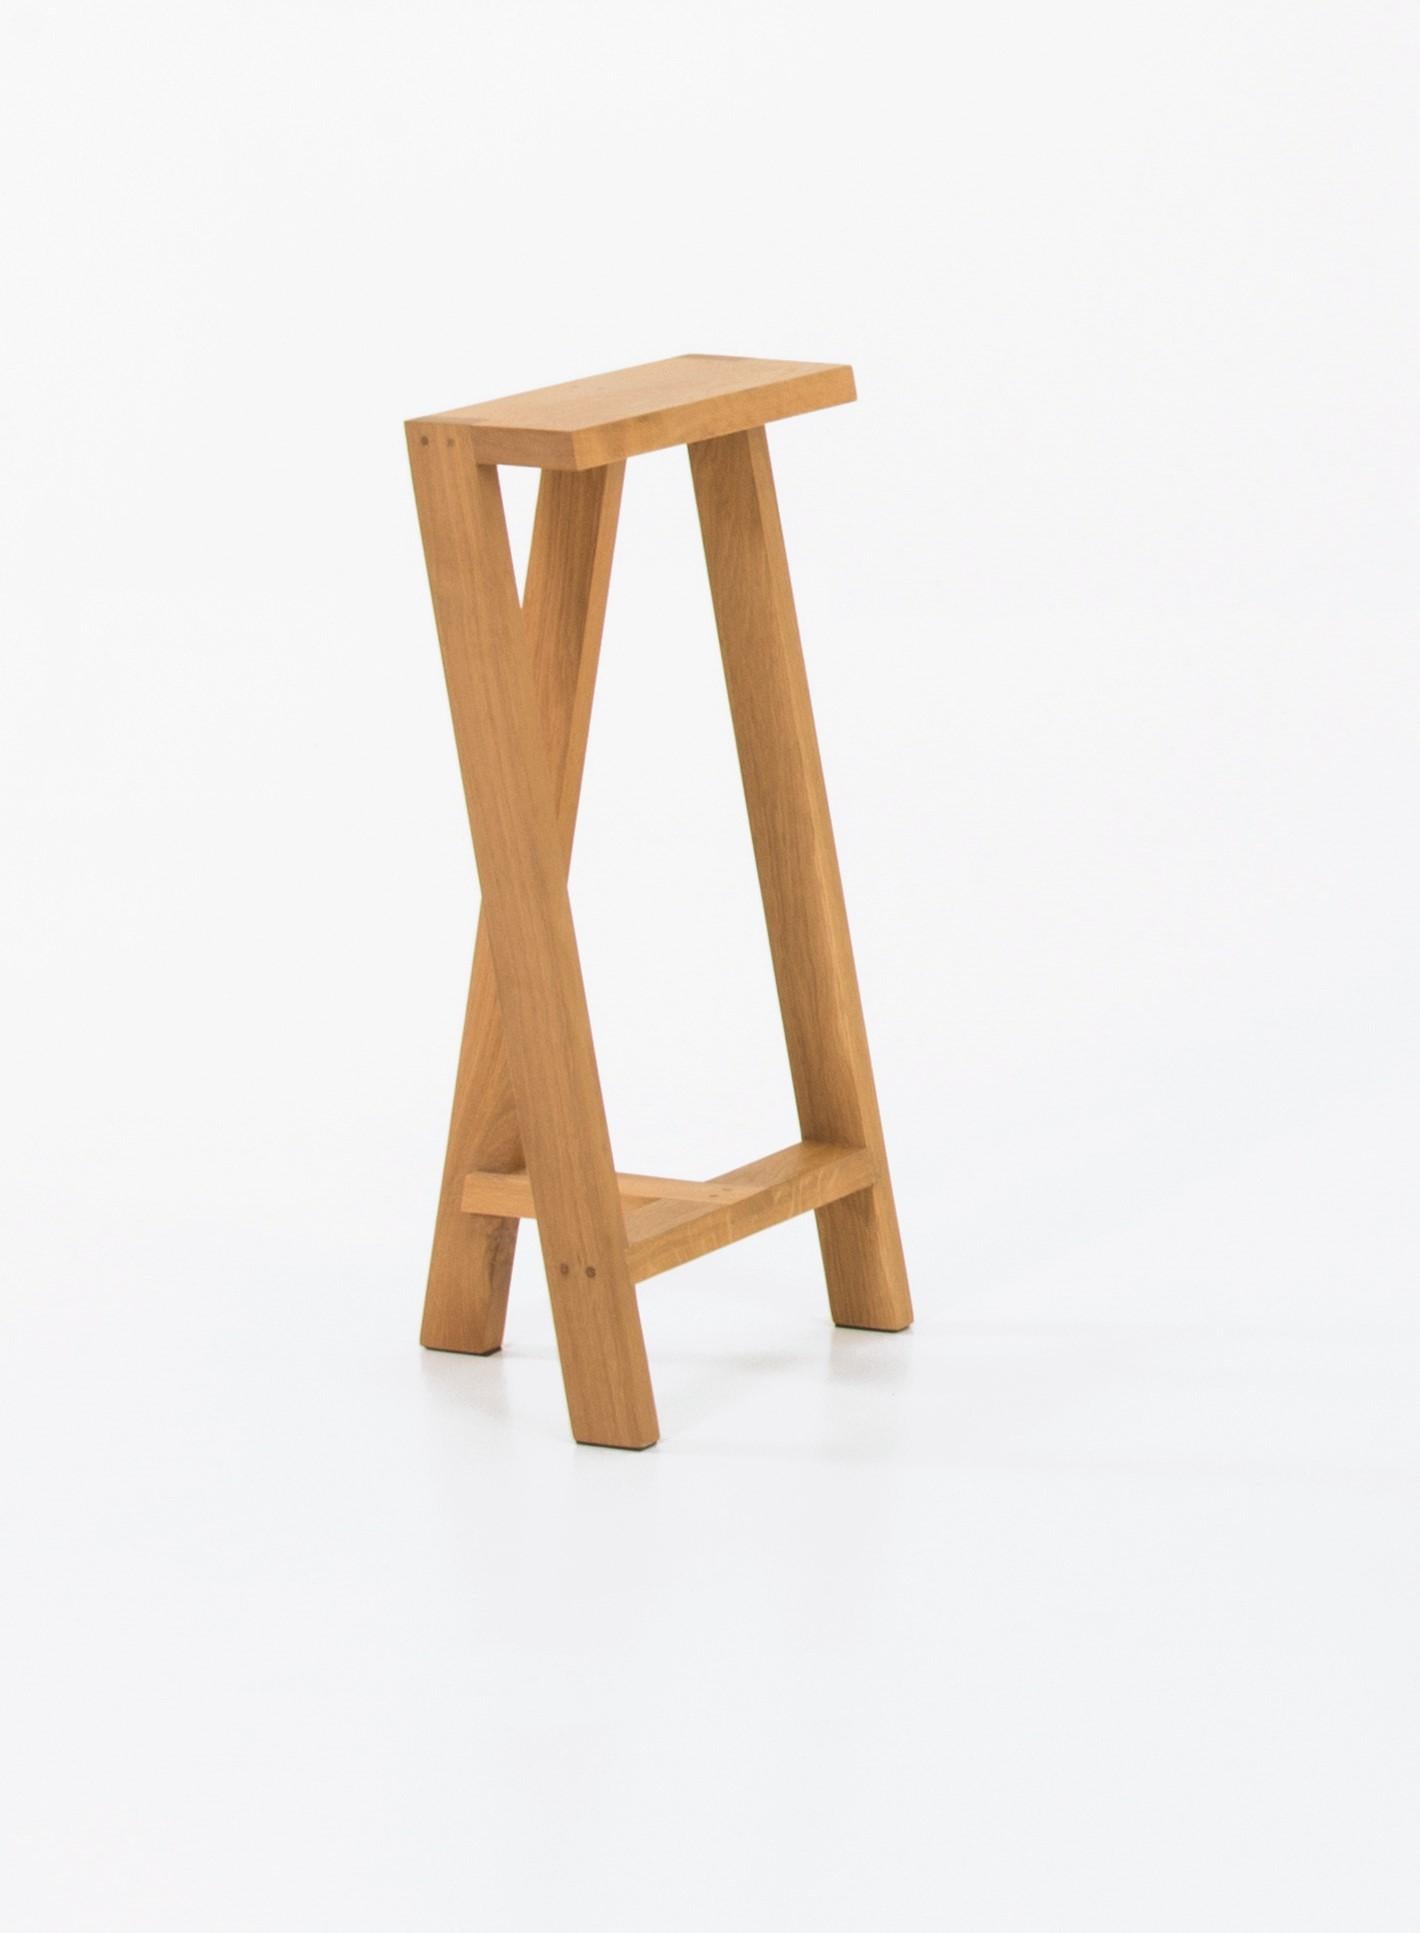 Set of 4 Small Pausa oak stool by Pierre-Emmanuel Vandeputte
Dimensions: D 20 x W 35 x H 45 cm
Materials: oak wood
Available in burnt oak version and in 3 sizes, please contact us.

Pausa is a series of stools; 45cm, 65cm, or 80cm of assembled